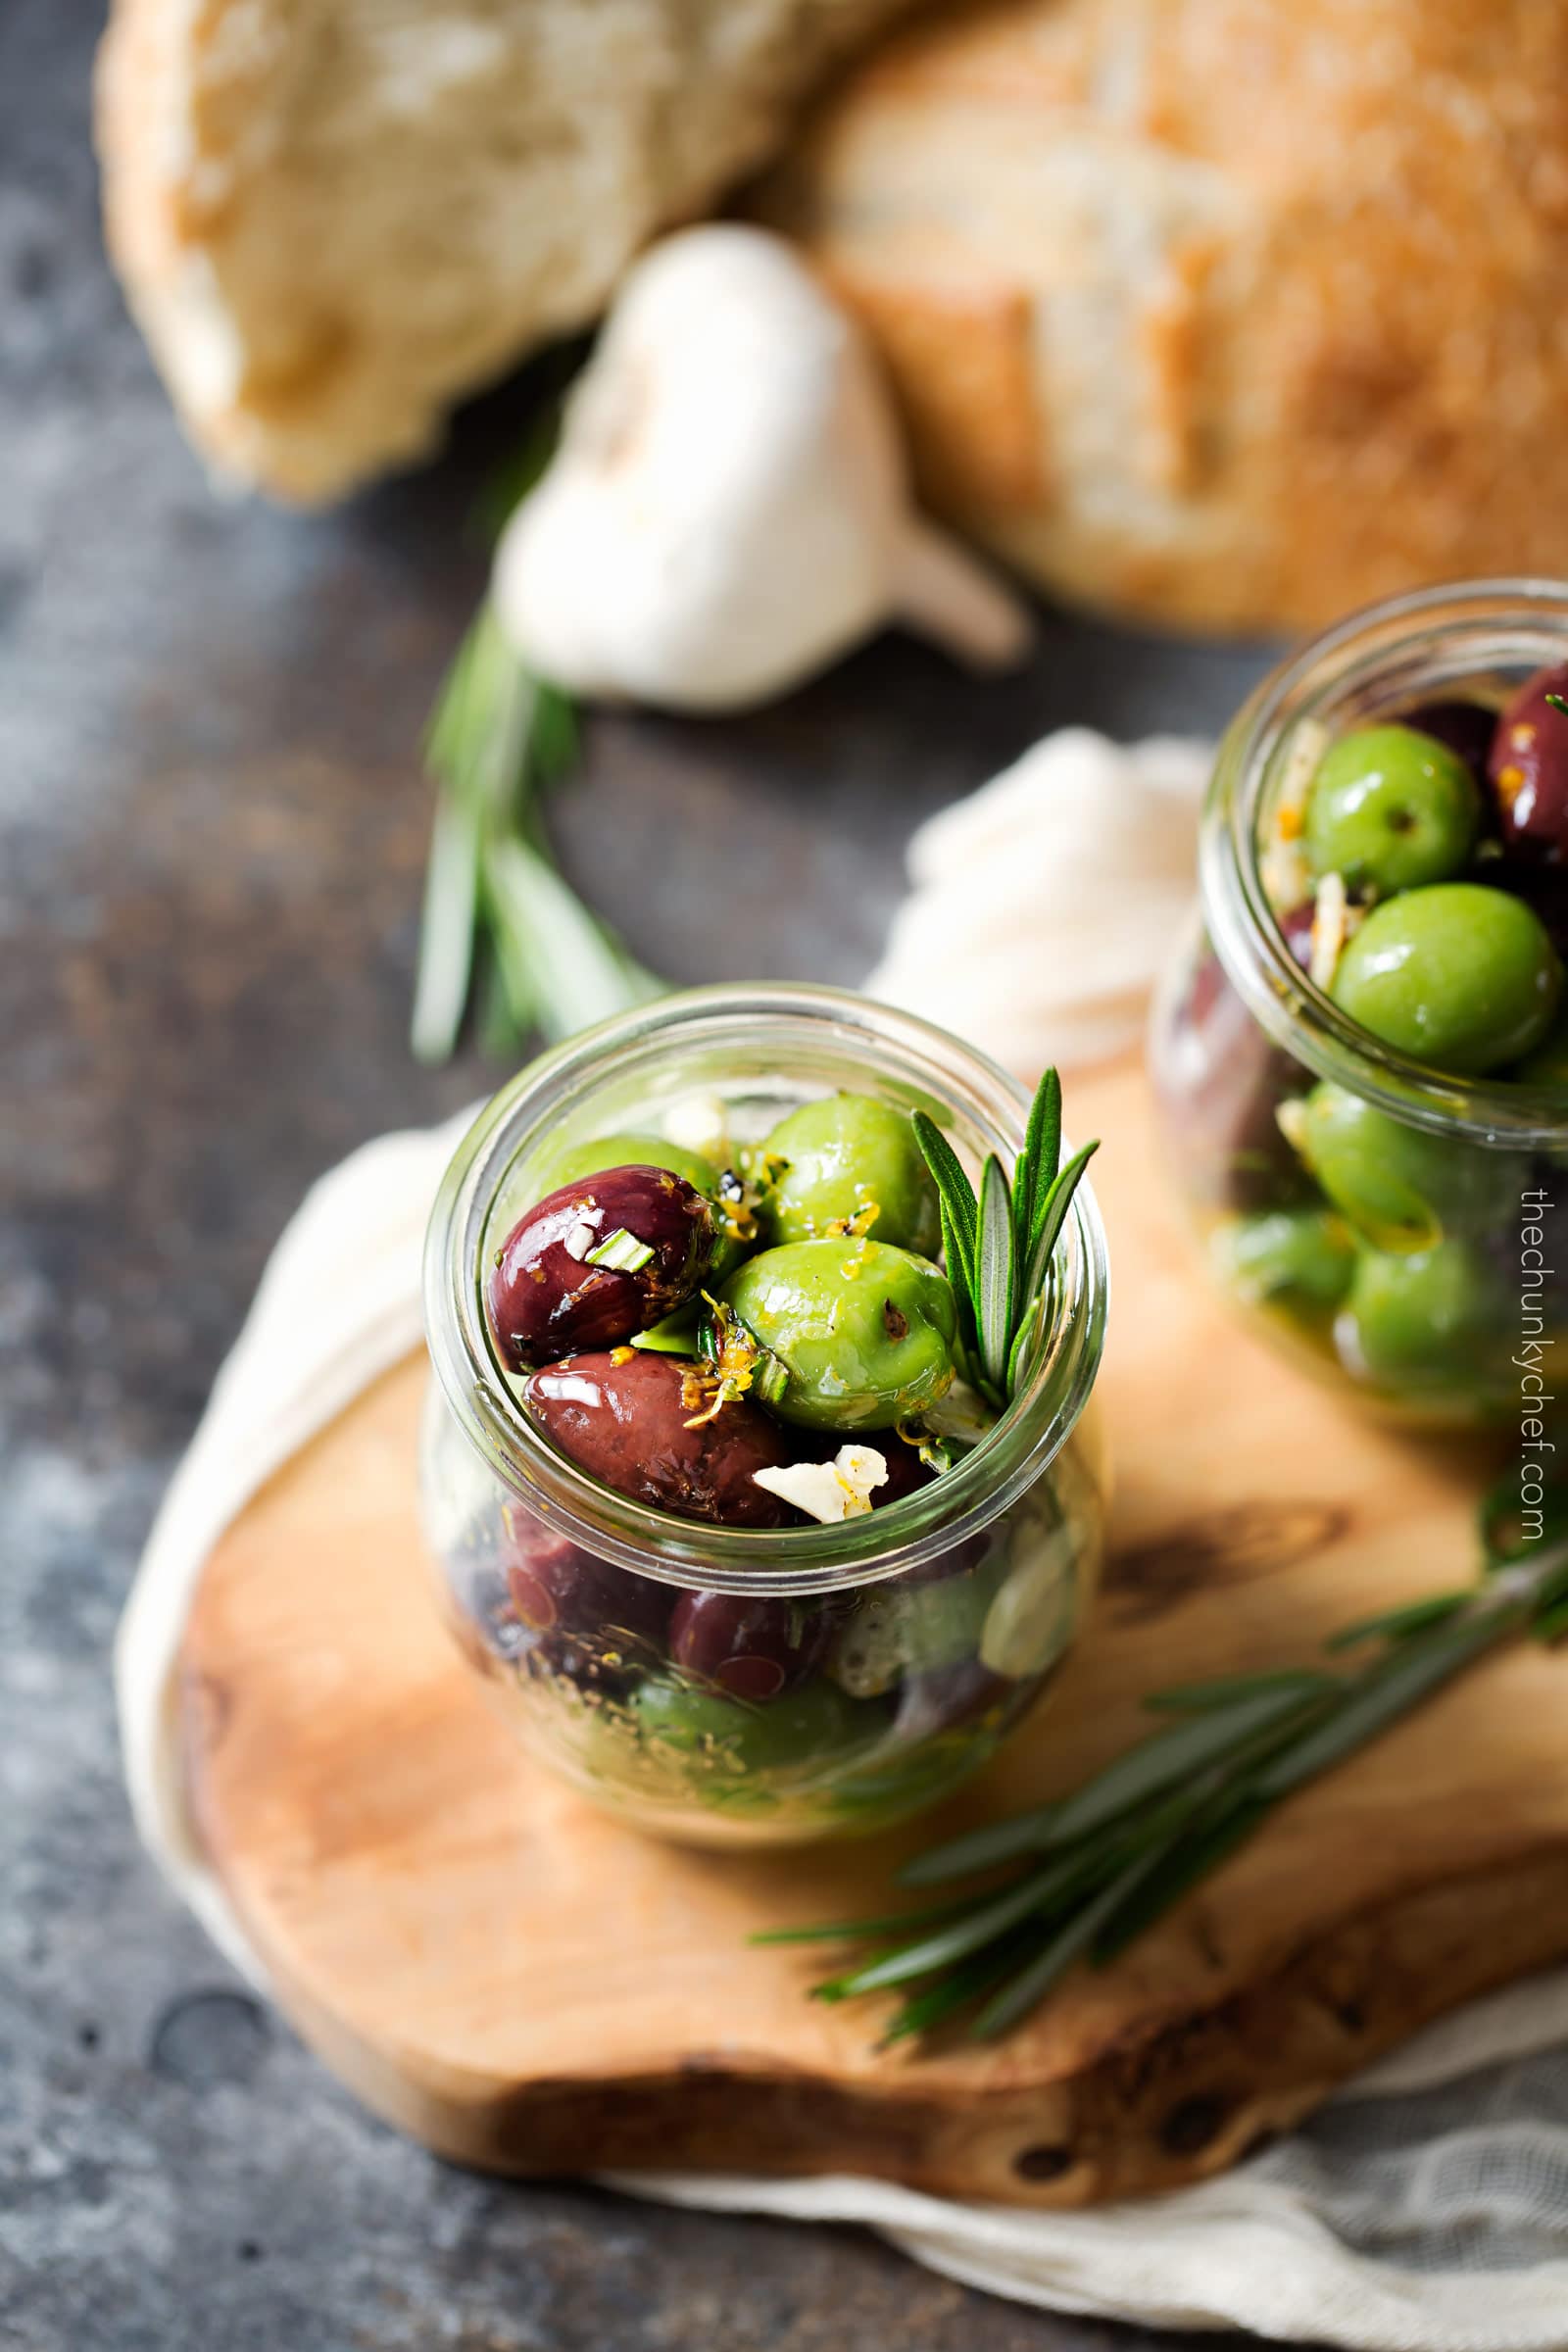 Easy Citrus Herb Marinated Olives | Kalamata and Castelvetrano olives are marinated in a mouthwatering marinade of citrus, herbs and garlic. Perfect for a snack, party, or cheese platter! | http://thechunkychef.com